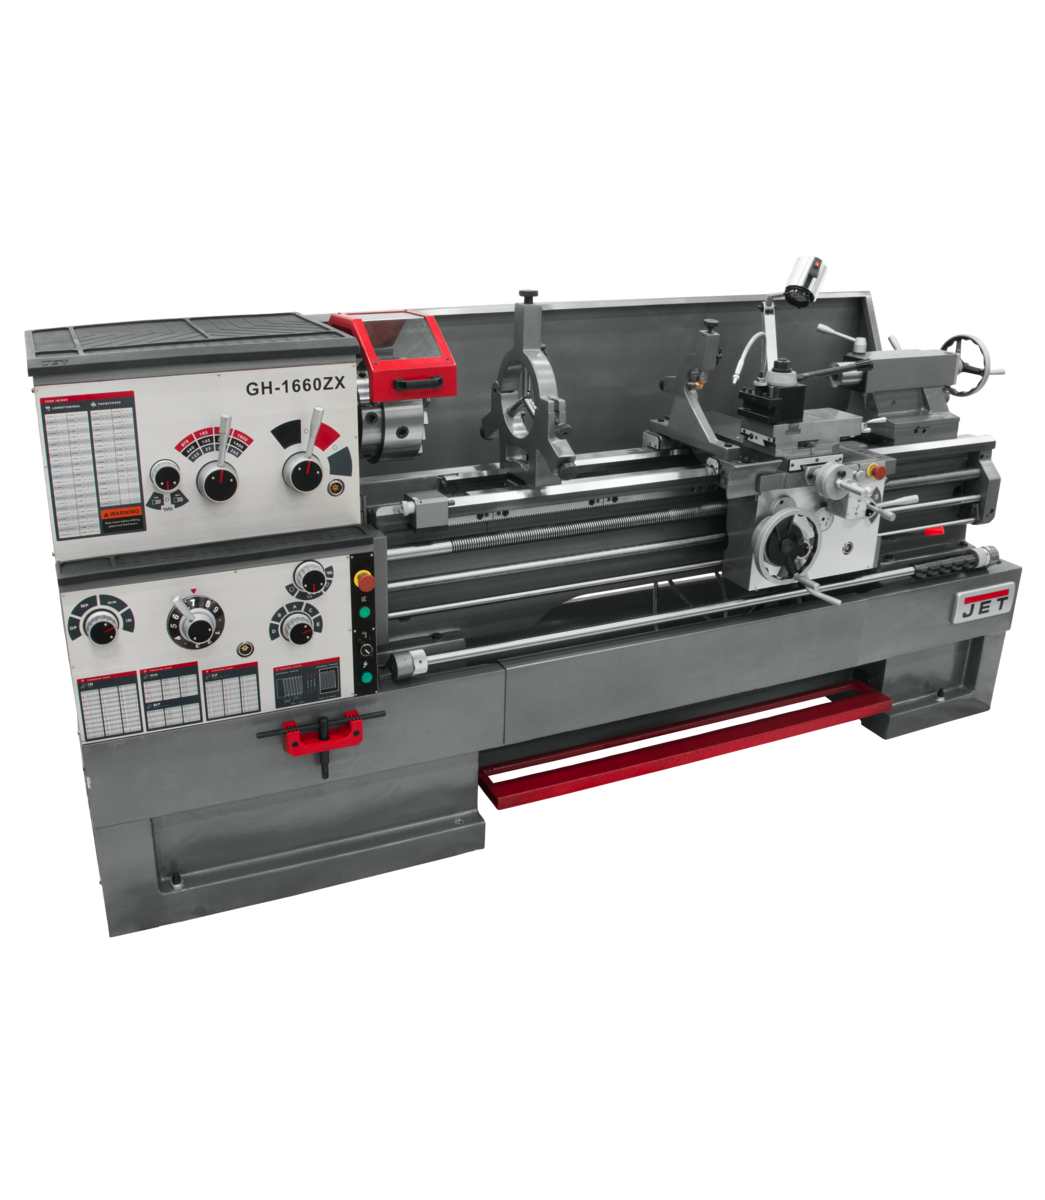 321940, GH-1660ZX, GH-1660ZX, 16" Swing 60" Centers, D1-8 Camlock Spindle, 7-1/2HP, 3Ph, 230/460V, Jet, Metalworking, Turning, Lathes